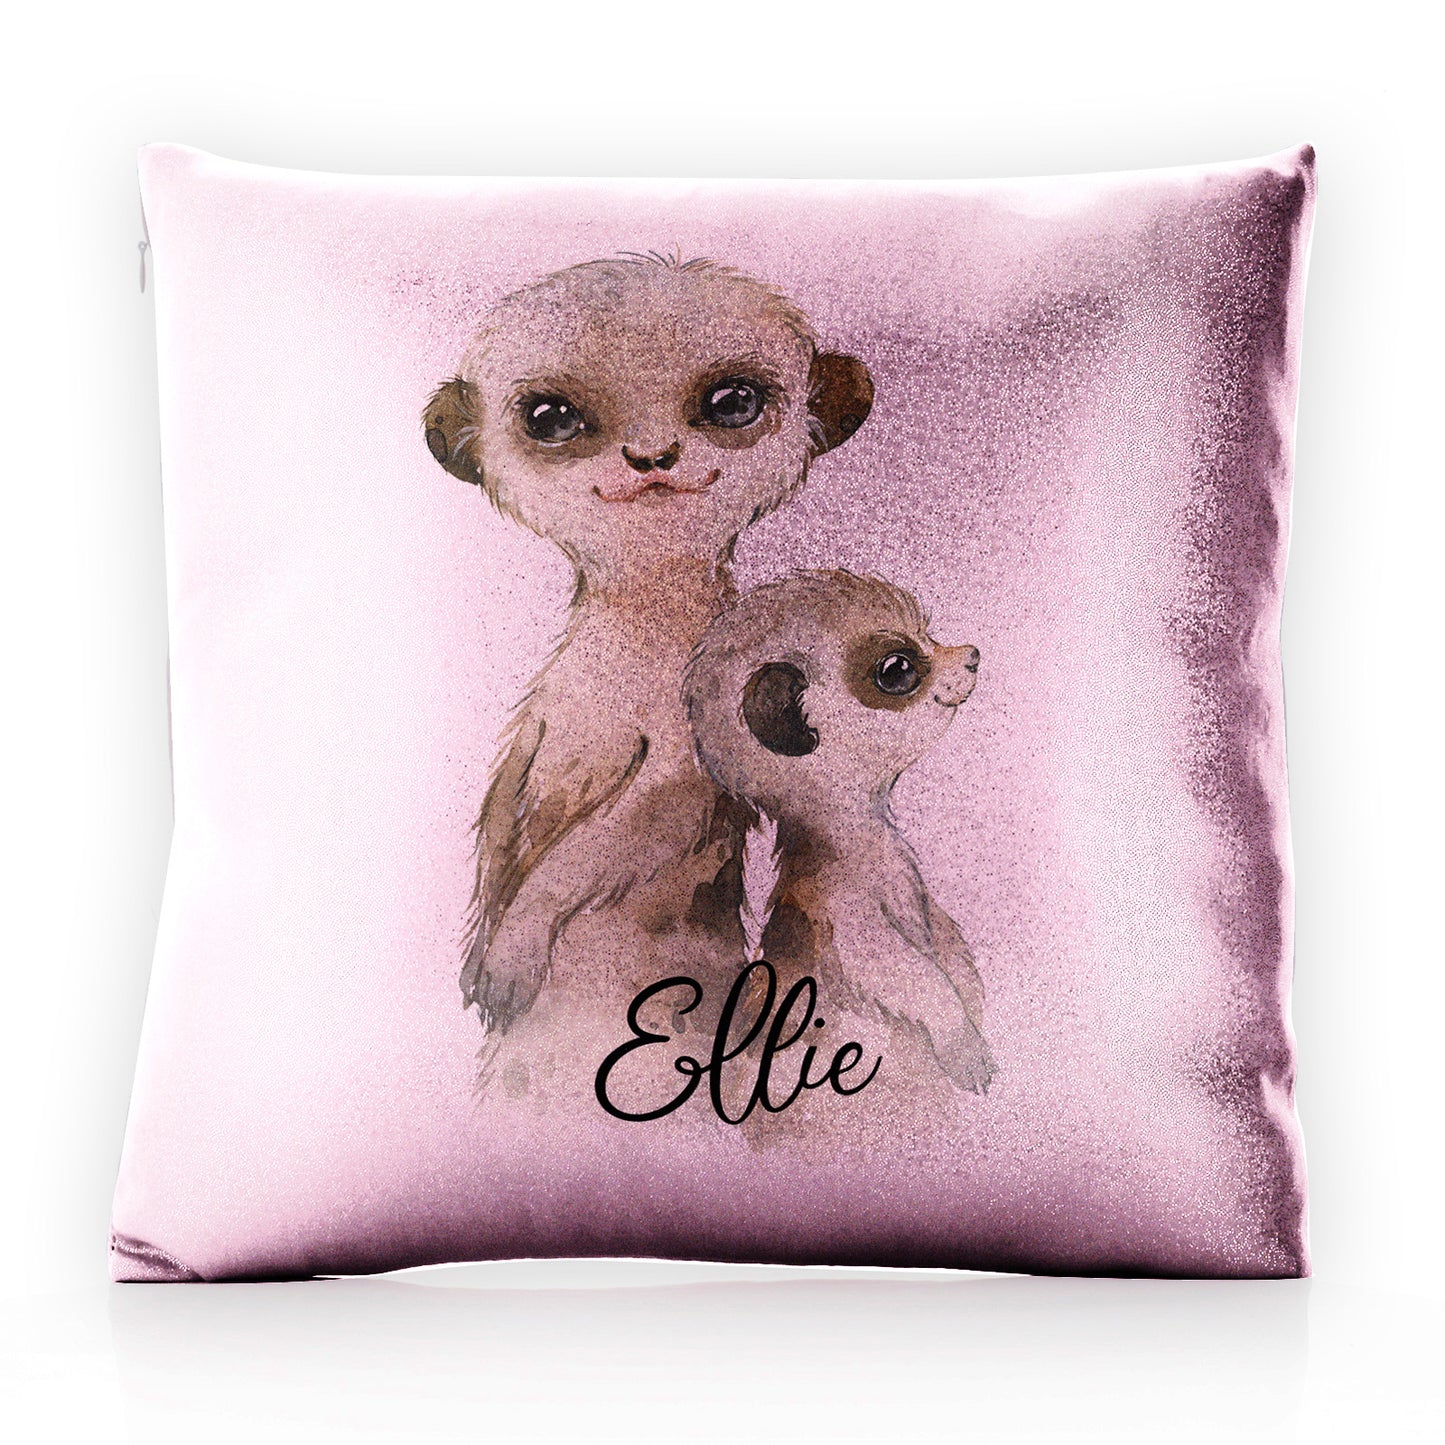 Personalised Glitter Cushion with Meerkat Baby and Adult and Cute Text